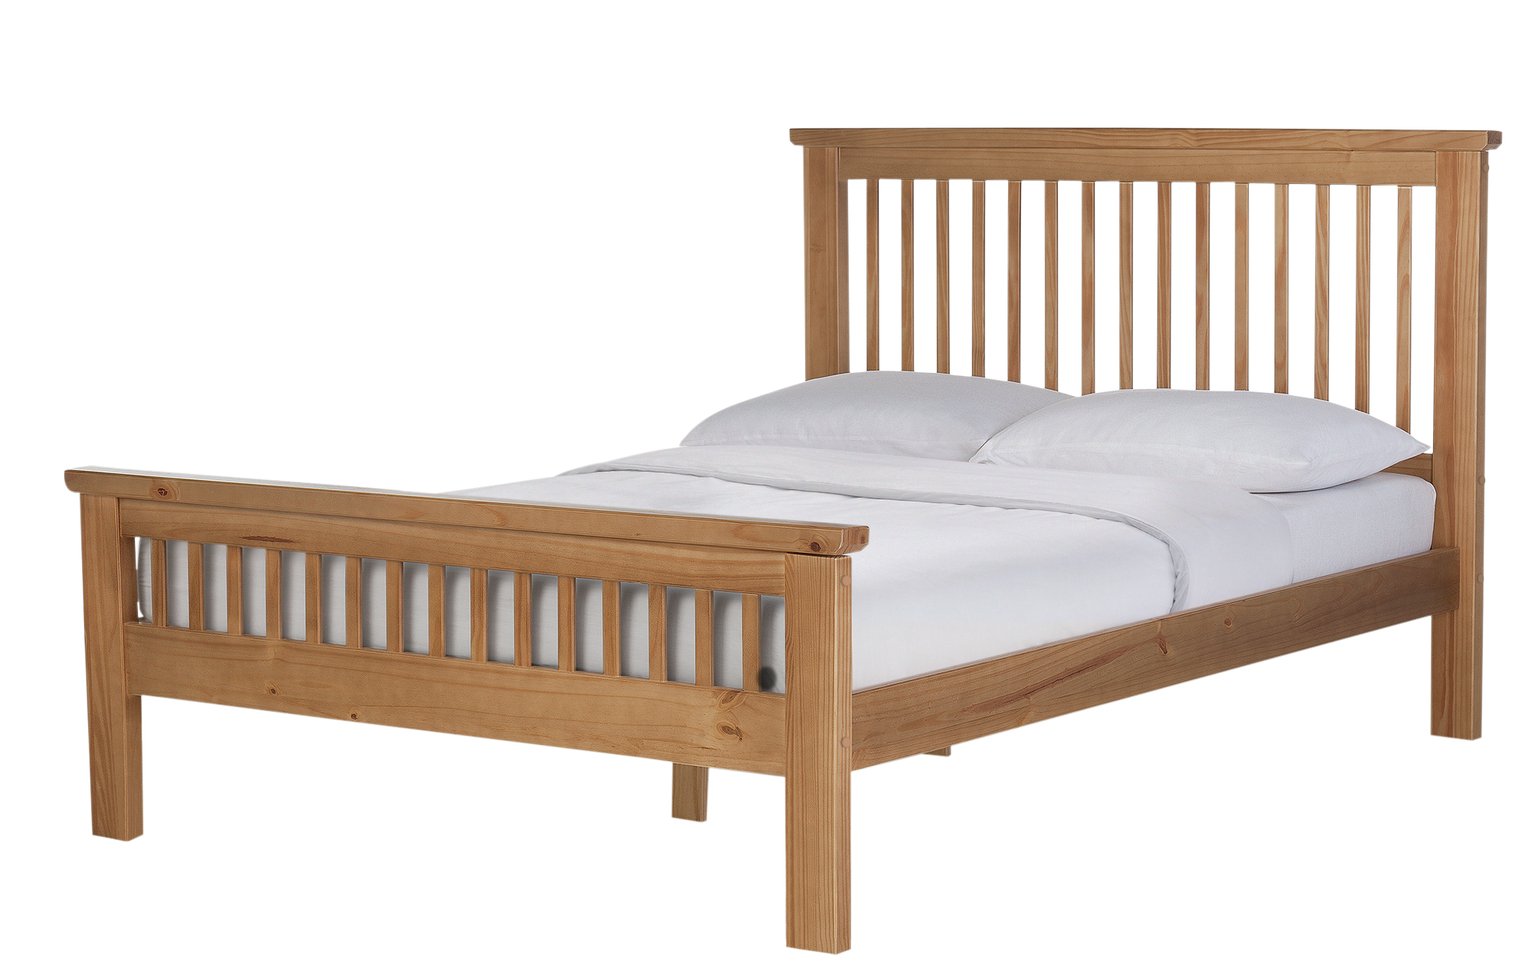 Argos Home Aubrey Small Double Wooden Bed Frame - Oak Stain